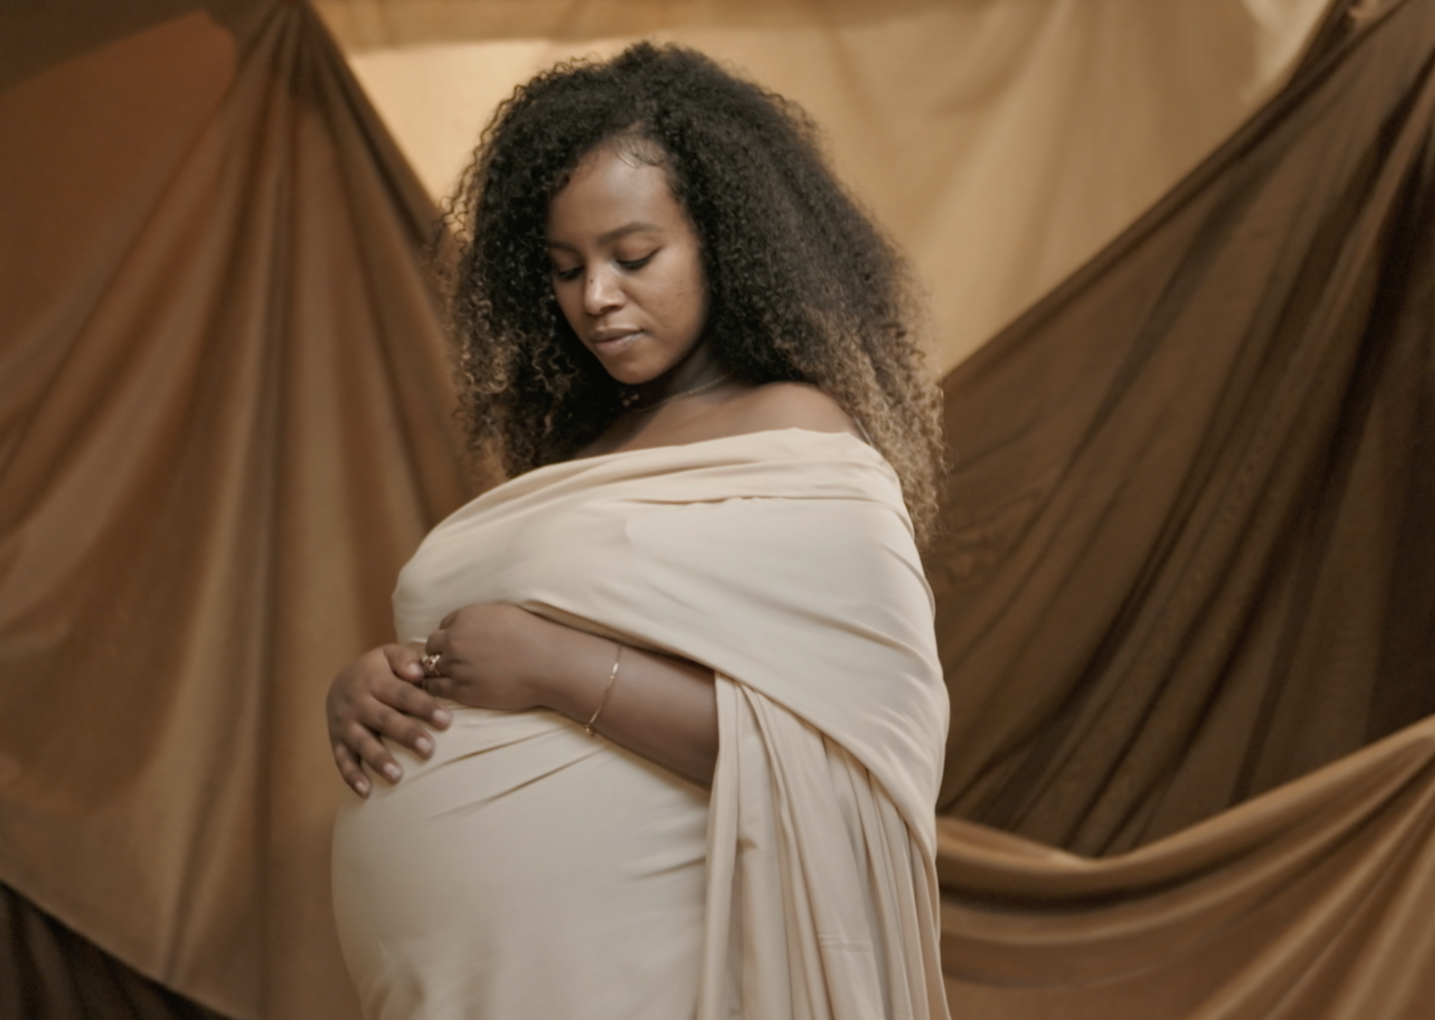 A screengrab of a Black, pregnant woman modeling in the Queen Collective documentary surrounding Black maternal health